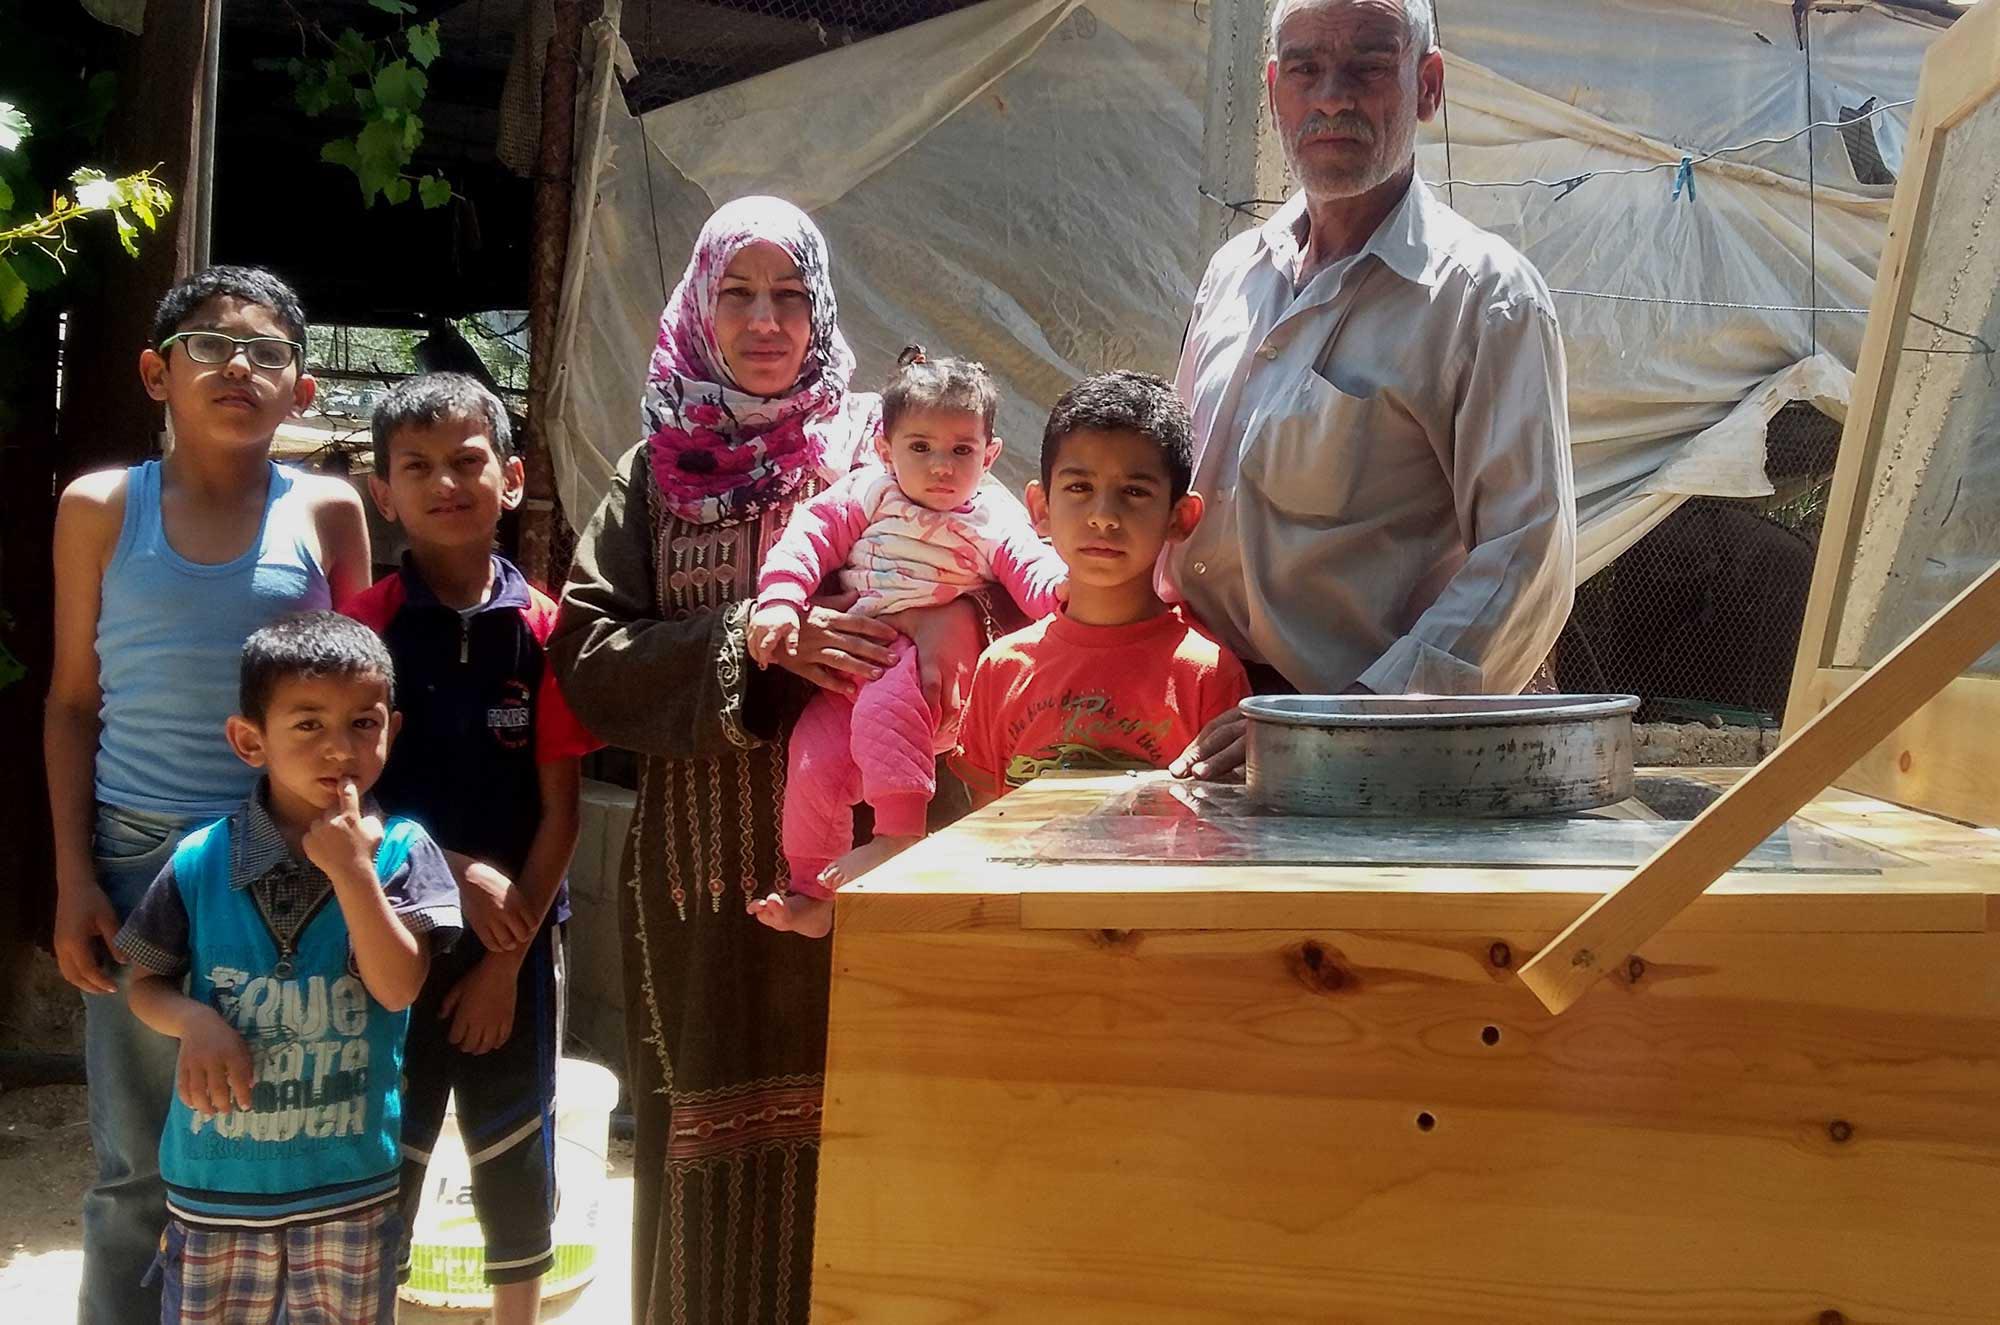 Sumaya takes care of her children and her disabled husband. She depends on the greenhouse and solar cooker to provide meals for her family.